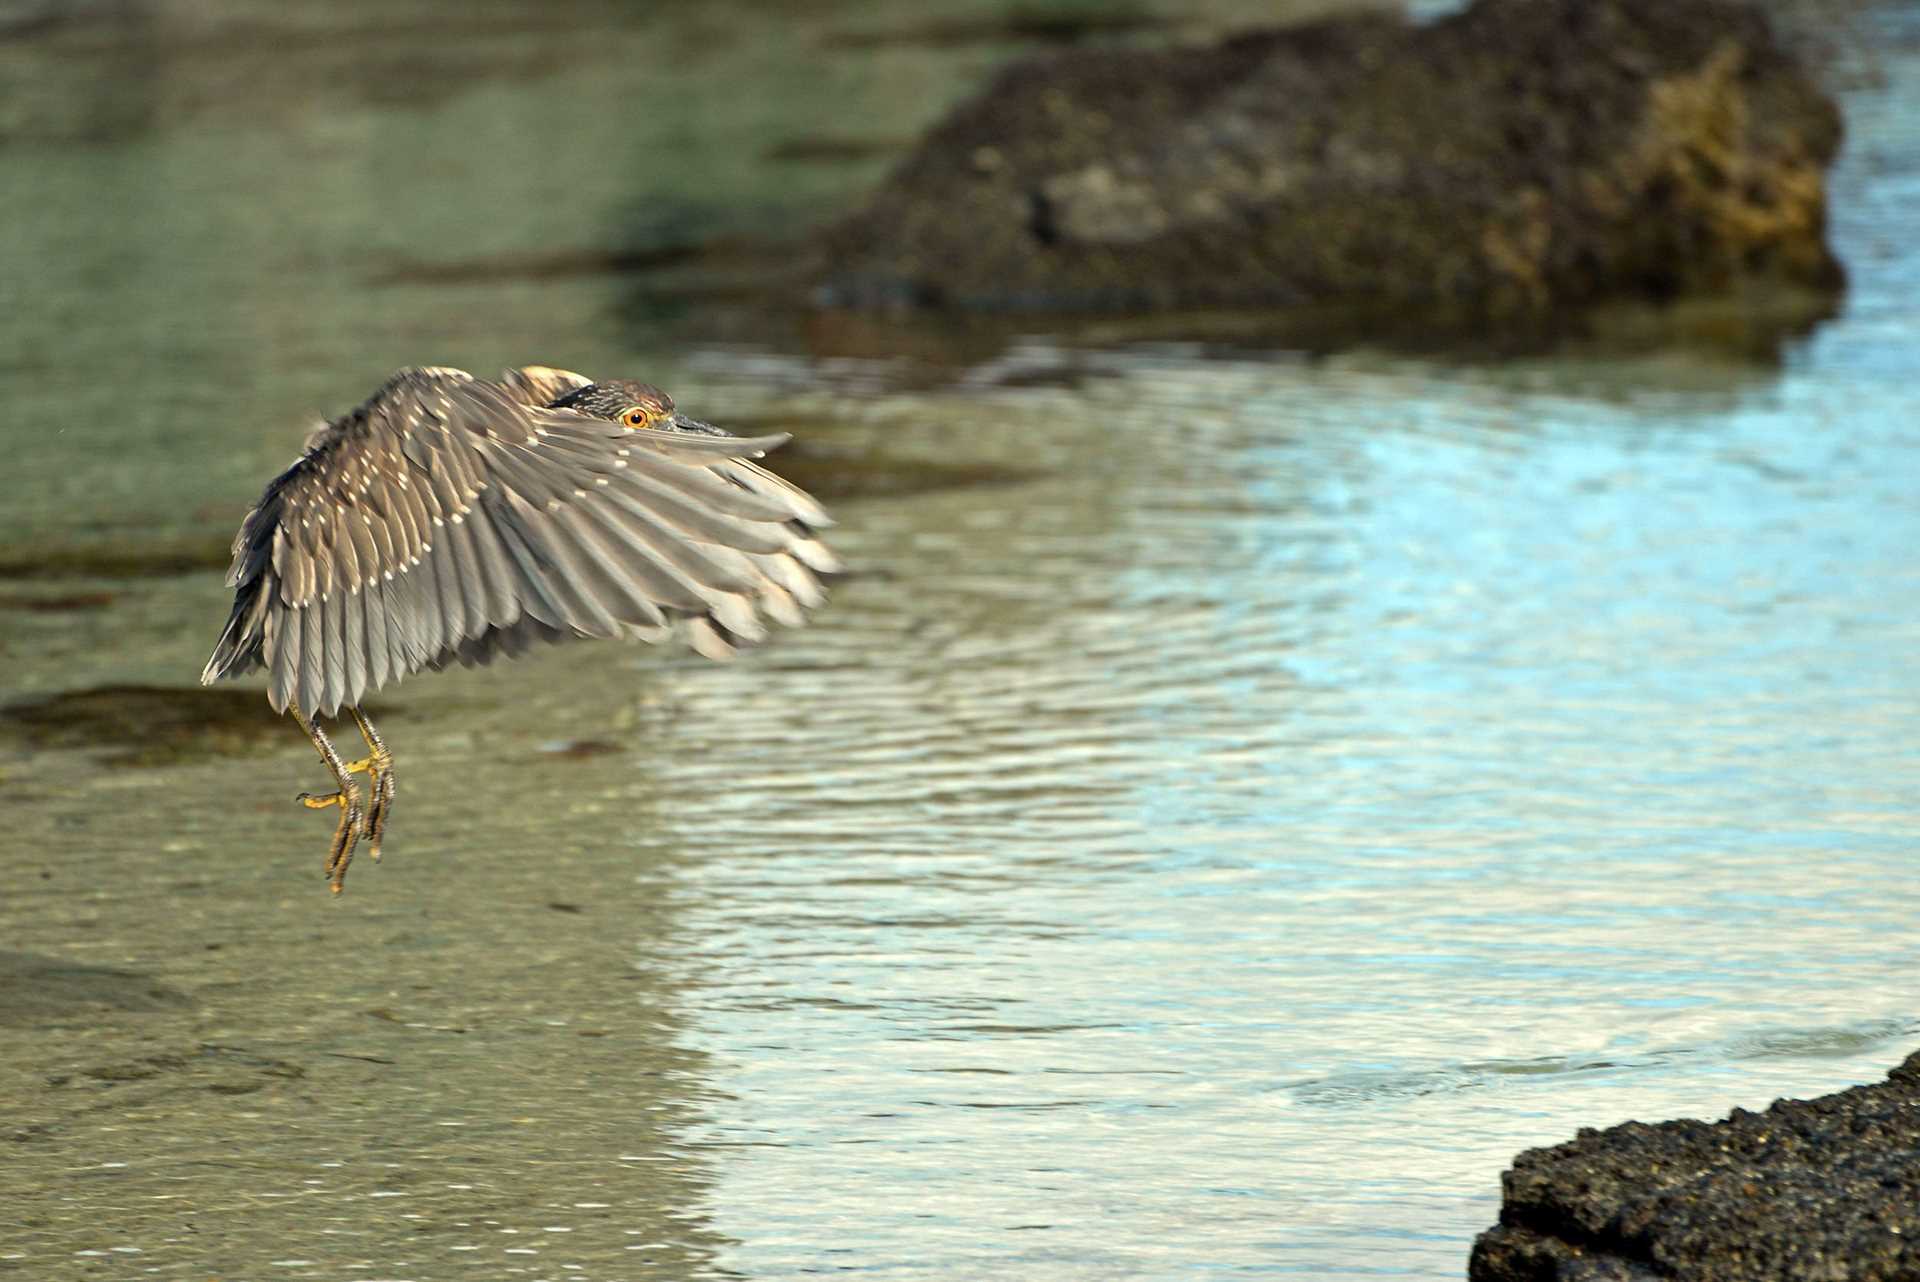 yellow-crowned night heron, a brown bird with long legs, mid flight